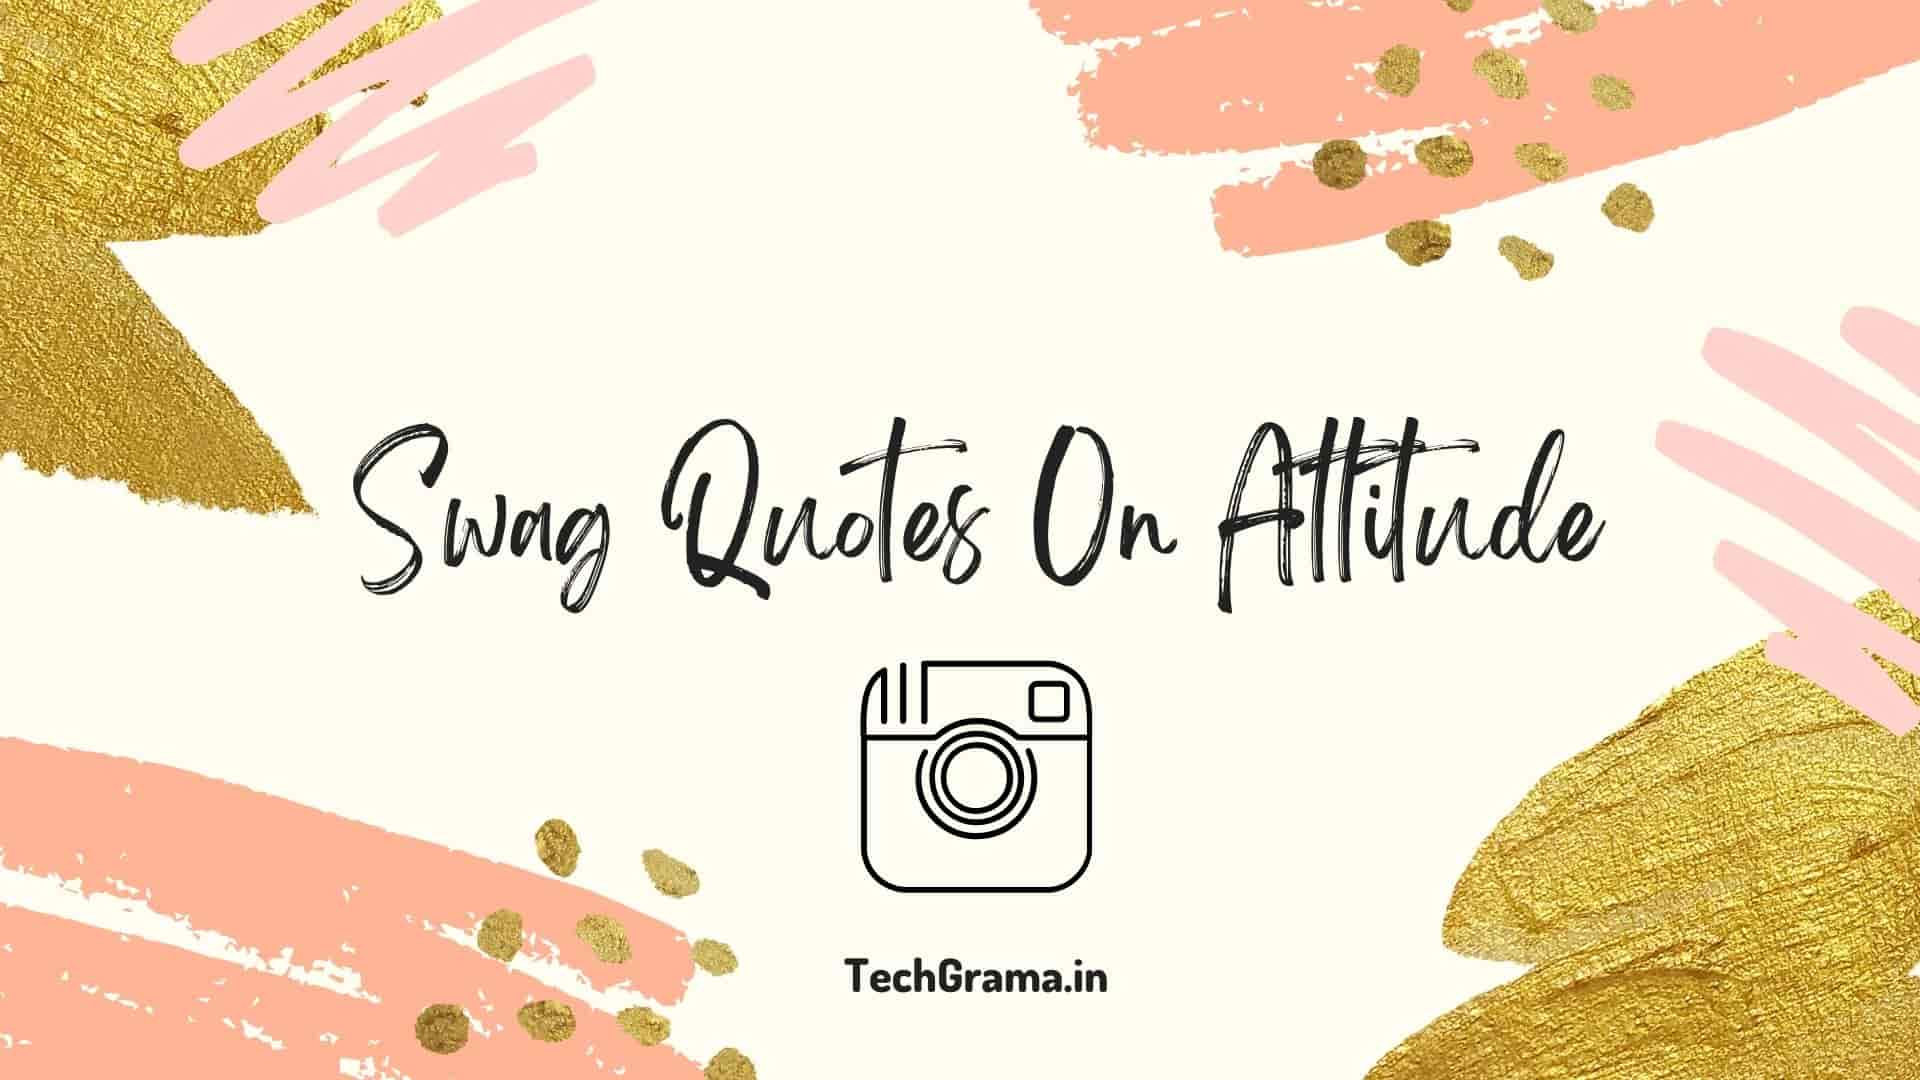 Best Attitude Captions For Instagram Post, Cool Attitude Captions, Swag Quotes on Attitude, Instagram Attitude Quotes, Smile Attitude Captions For Instagram, Best Attitude Captions For Insta, Cool Attitude Captions For Instagram, Cute Captions For Pictures of Yourself, Attitude Captions For Instagram For Girls or Boys.